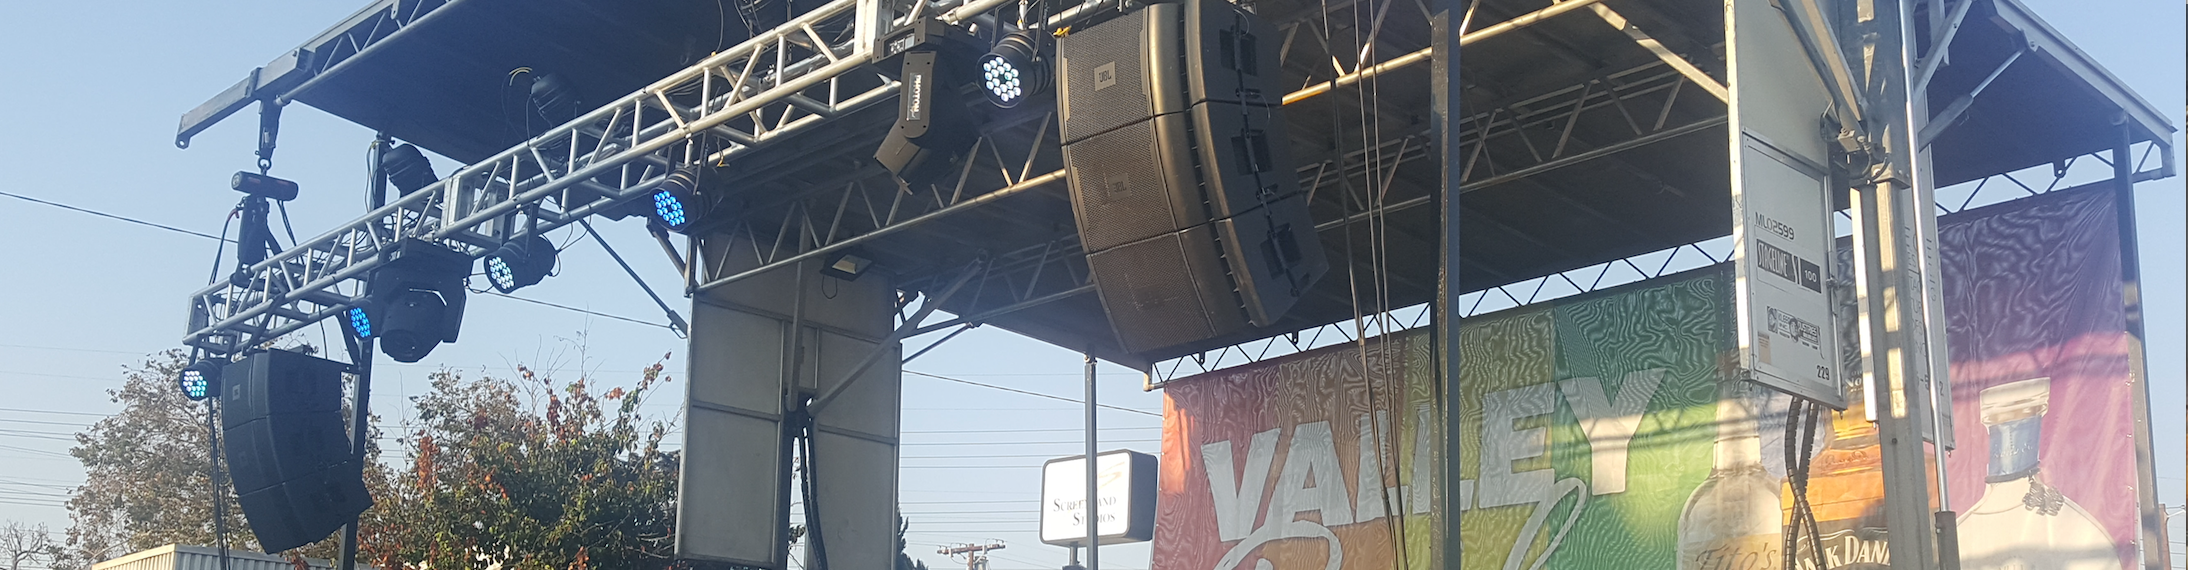 JBL Speakers Rigged to a stage at an outdoor event in St. Louis